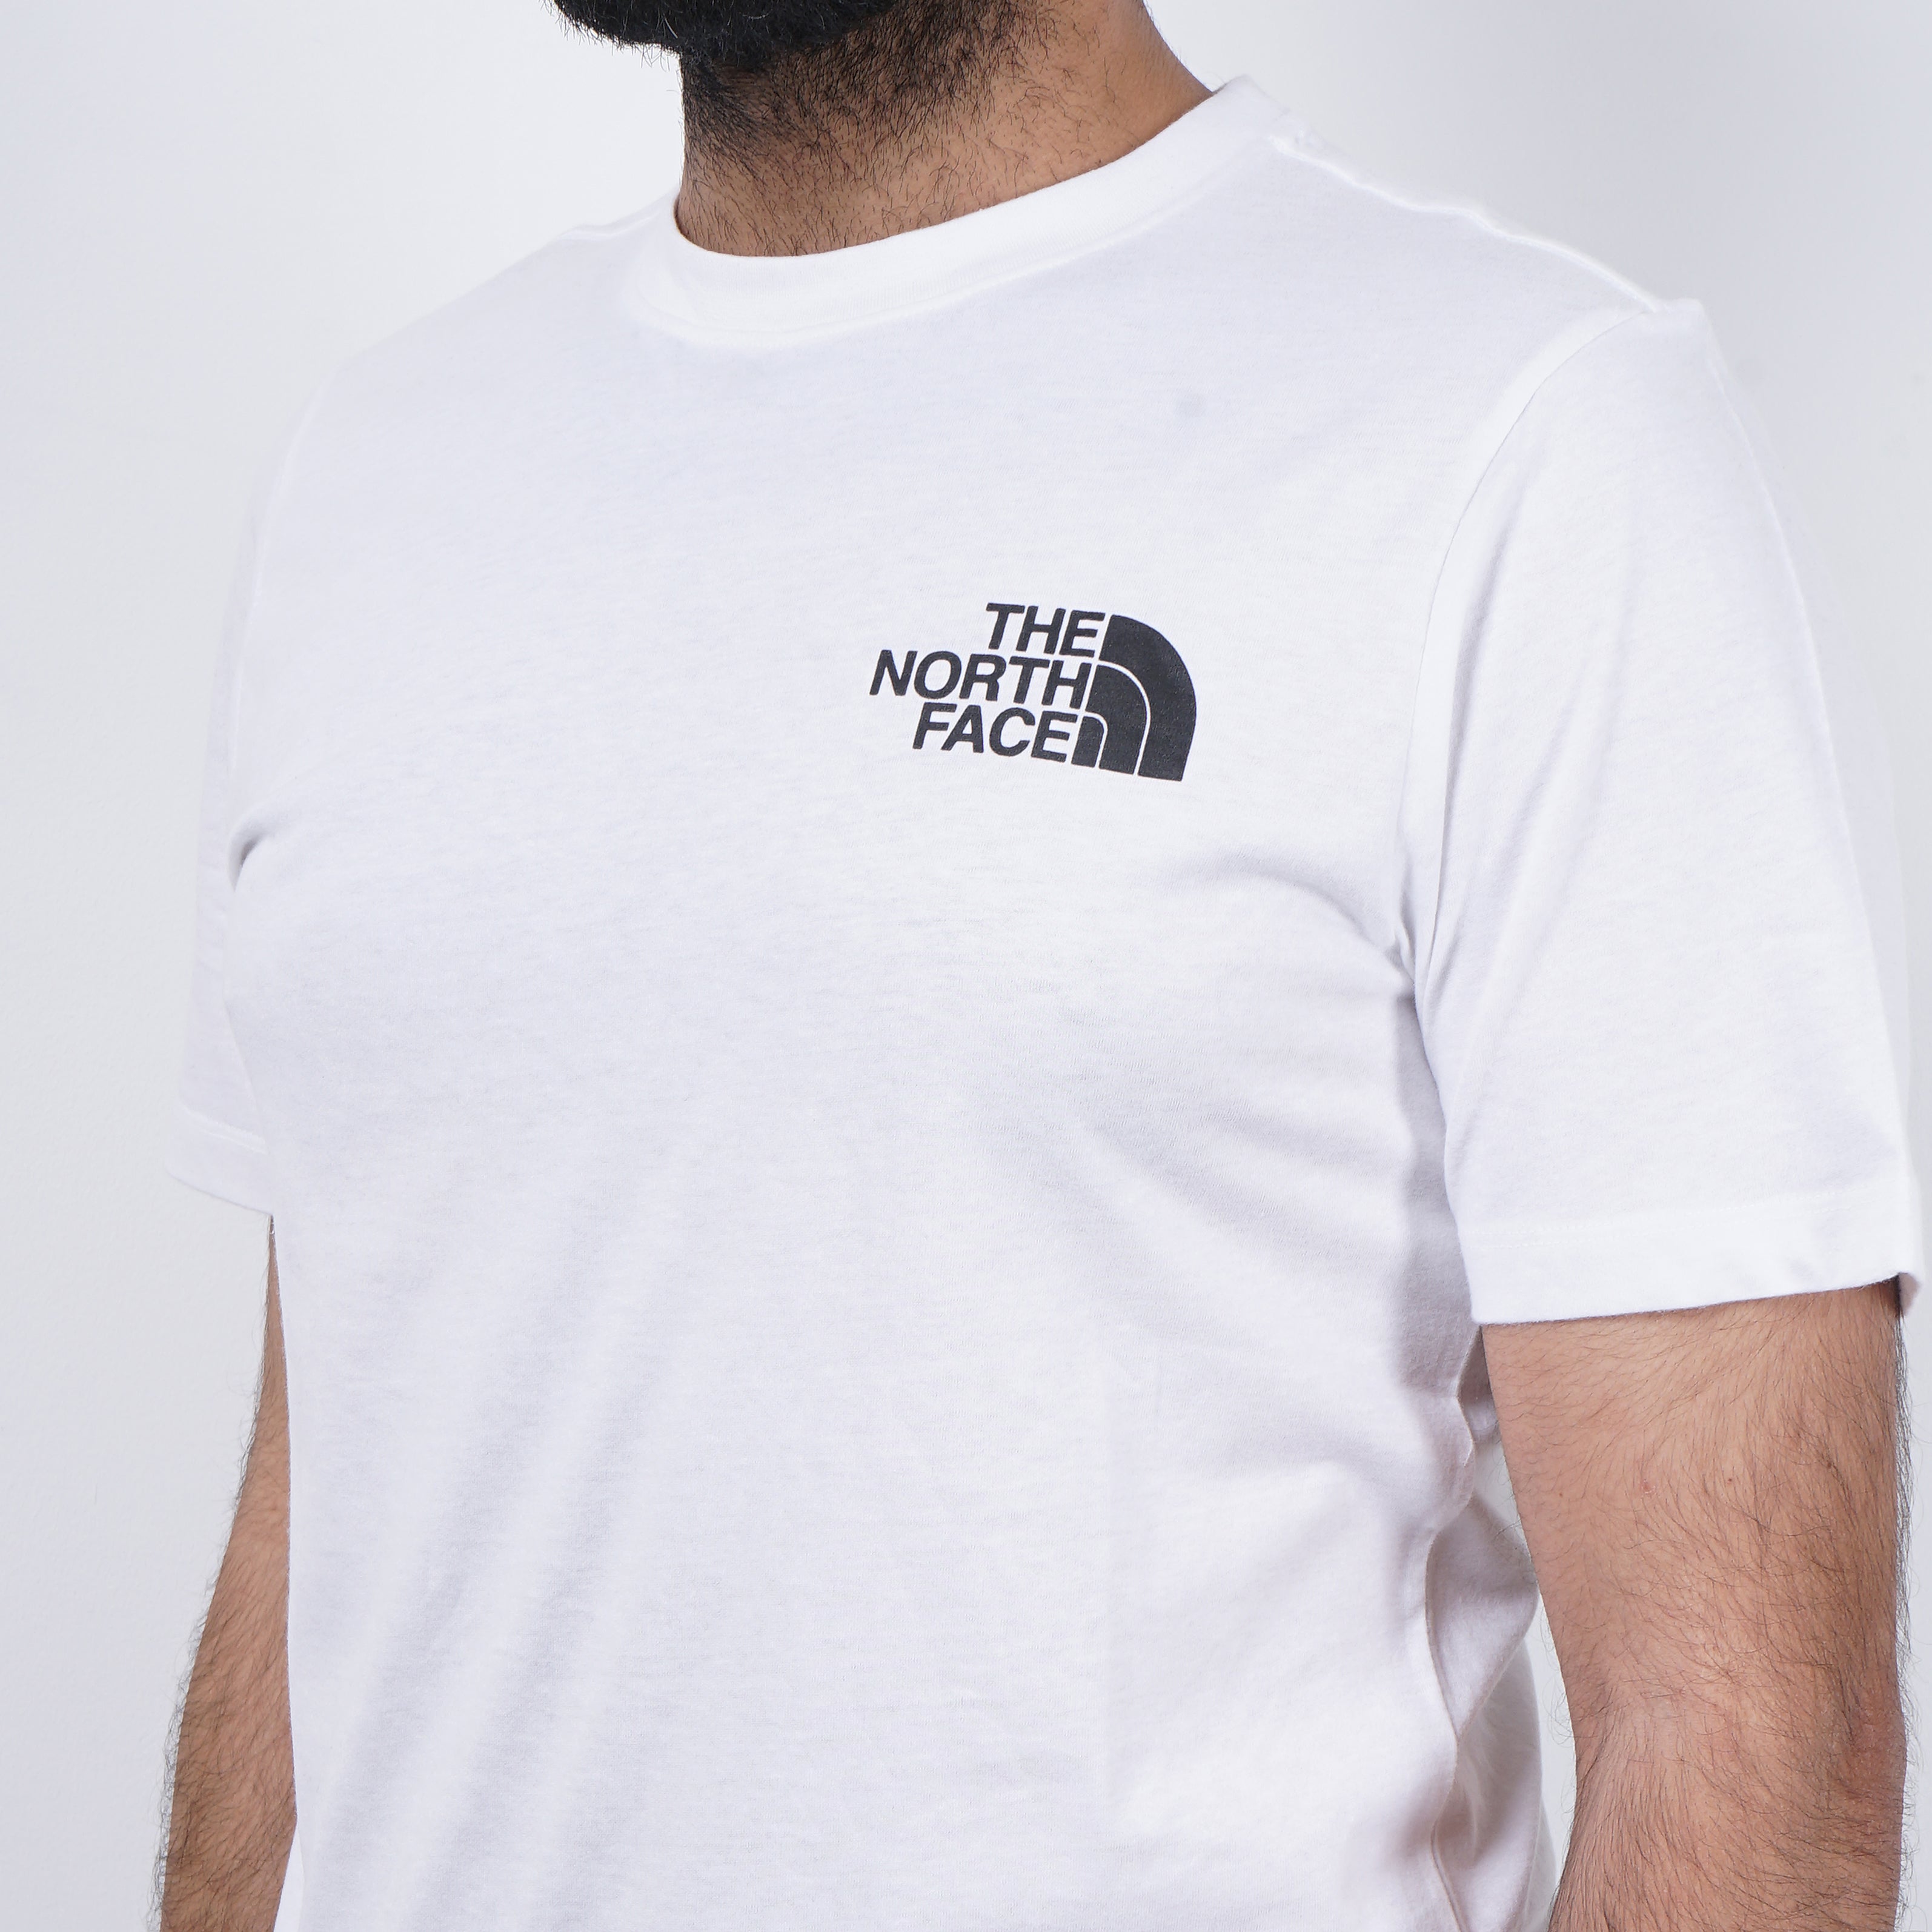 Man wearing a white The North Face t-shirt with the logo on the chest.